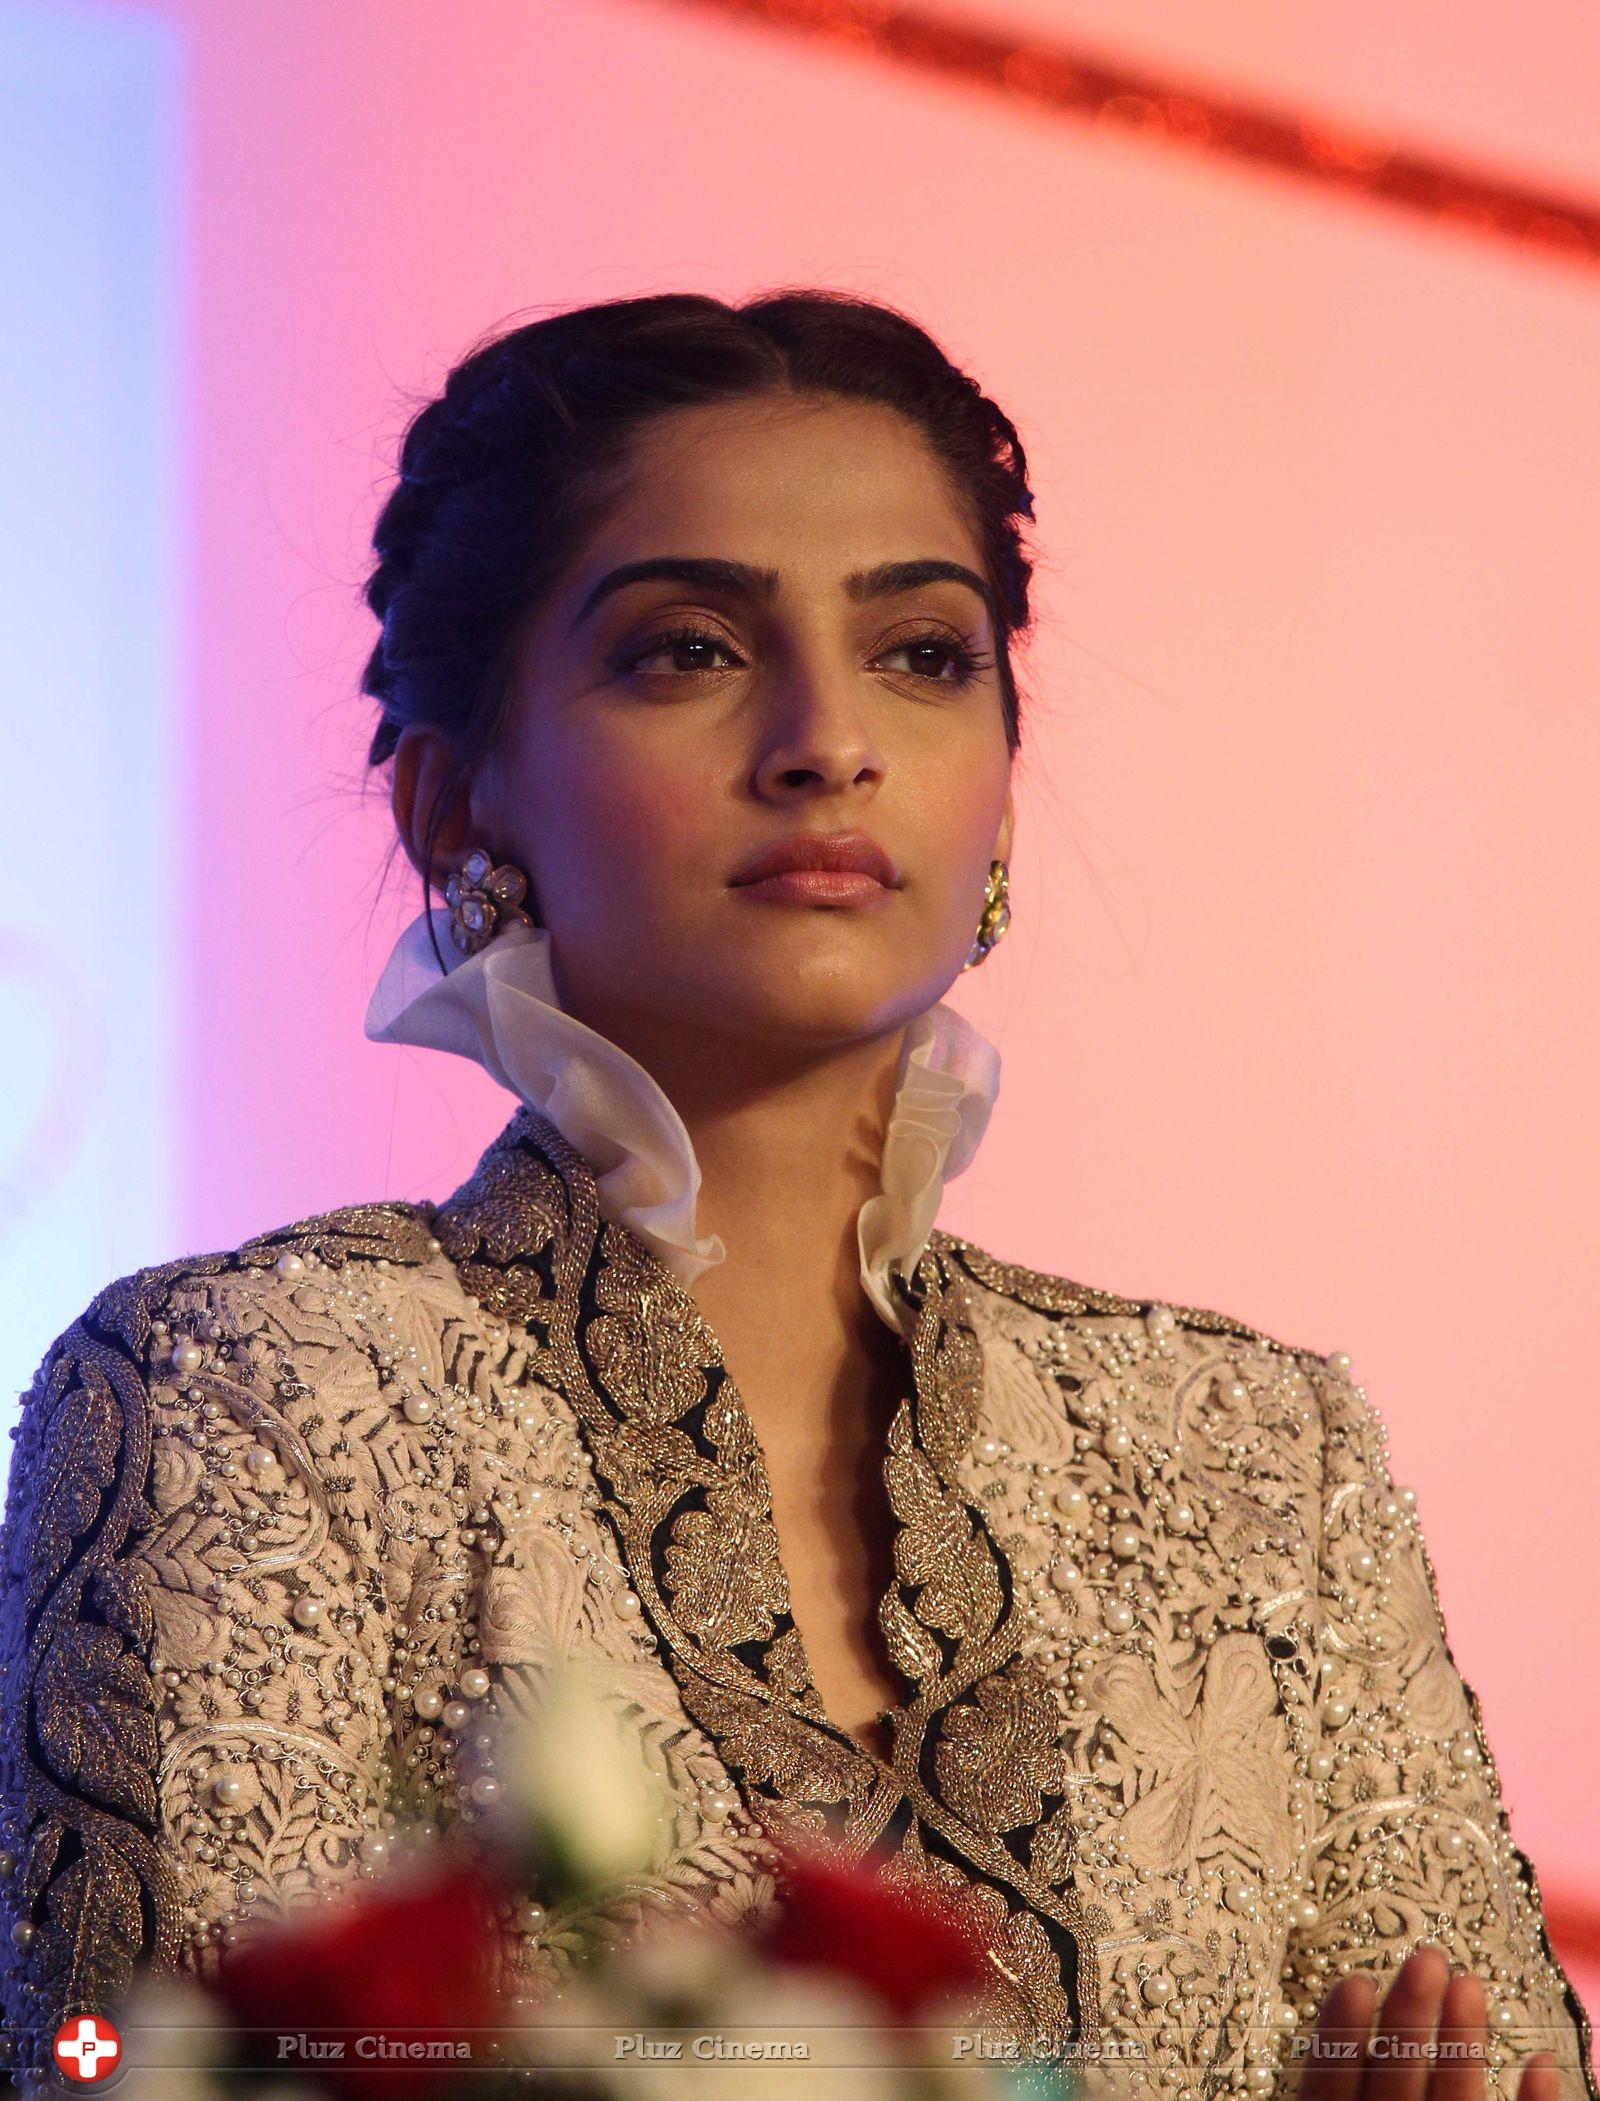 Sonam Kapoor Ahuja - FICCI Frames 2014 Day 1 Photos | Picture 726922